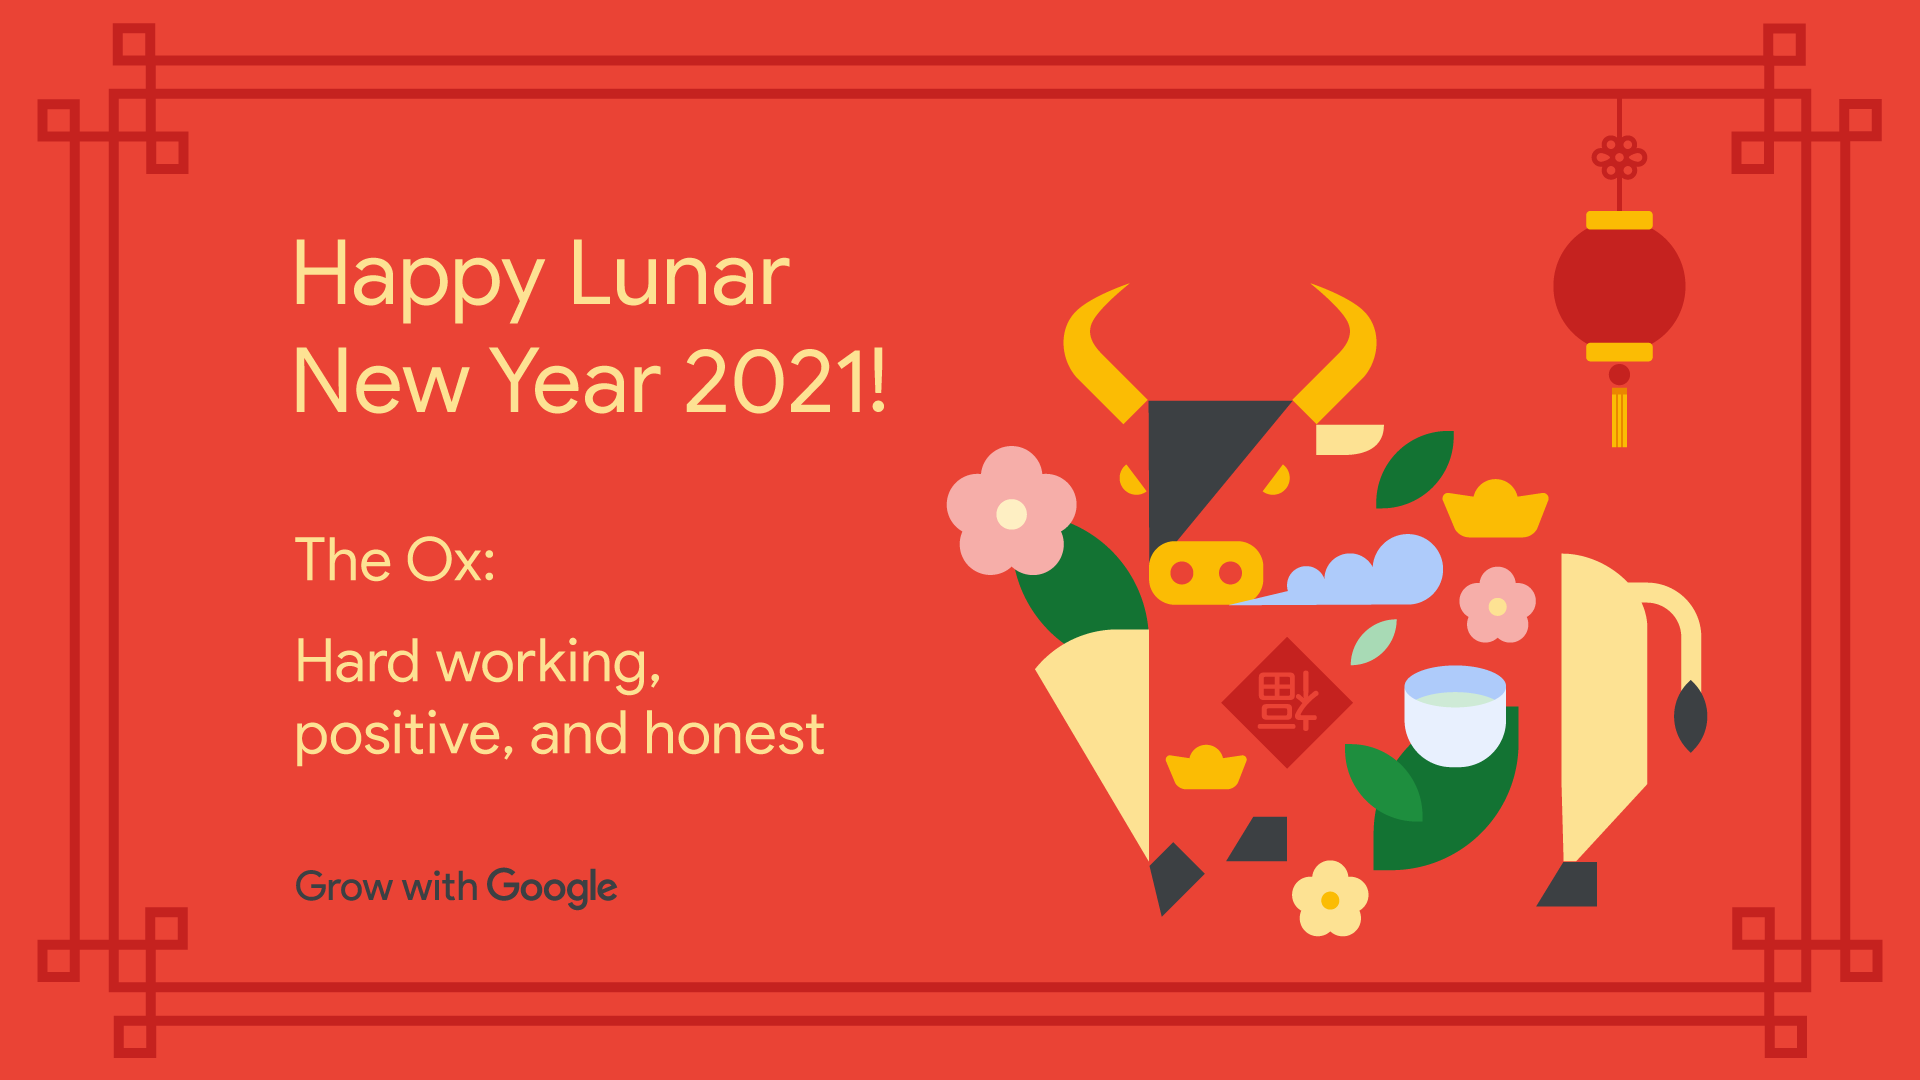 460-GwG-Chinese-New-Year-SMB-TW-FB-DL.png